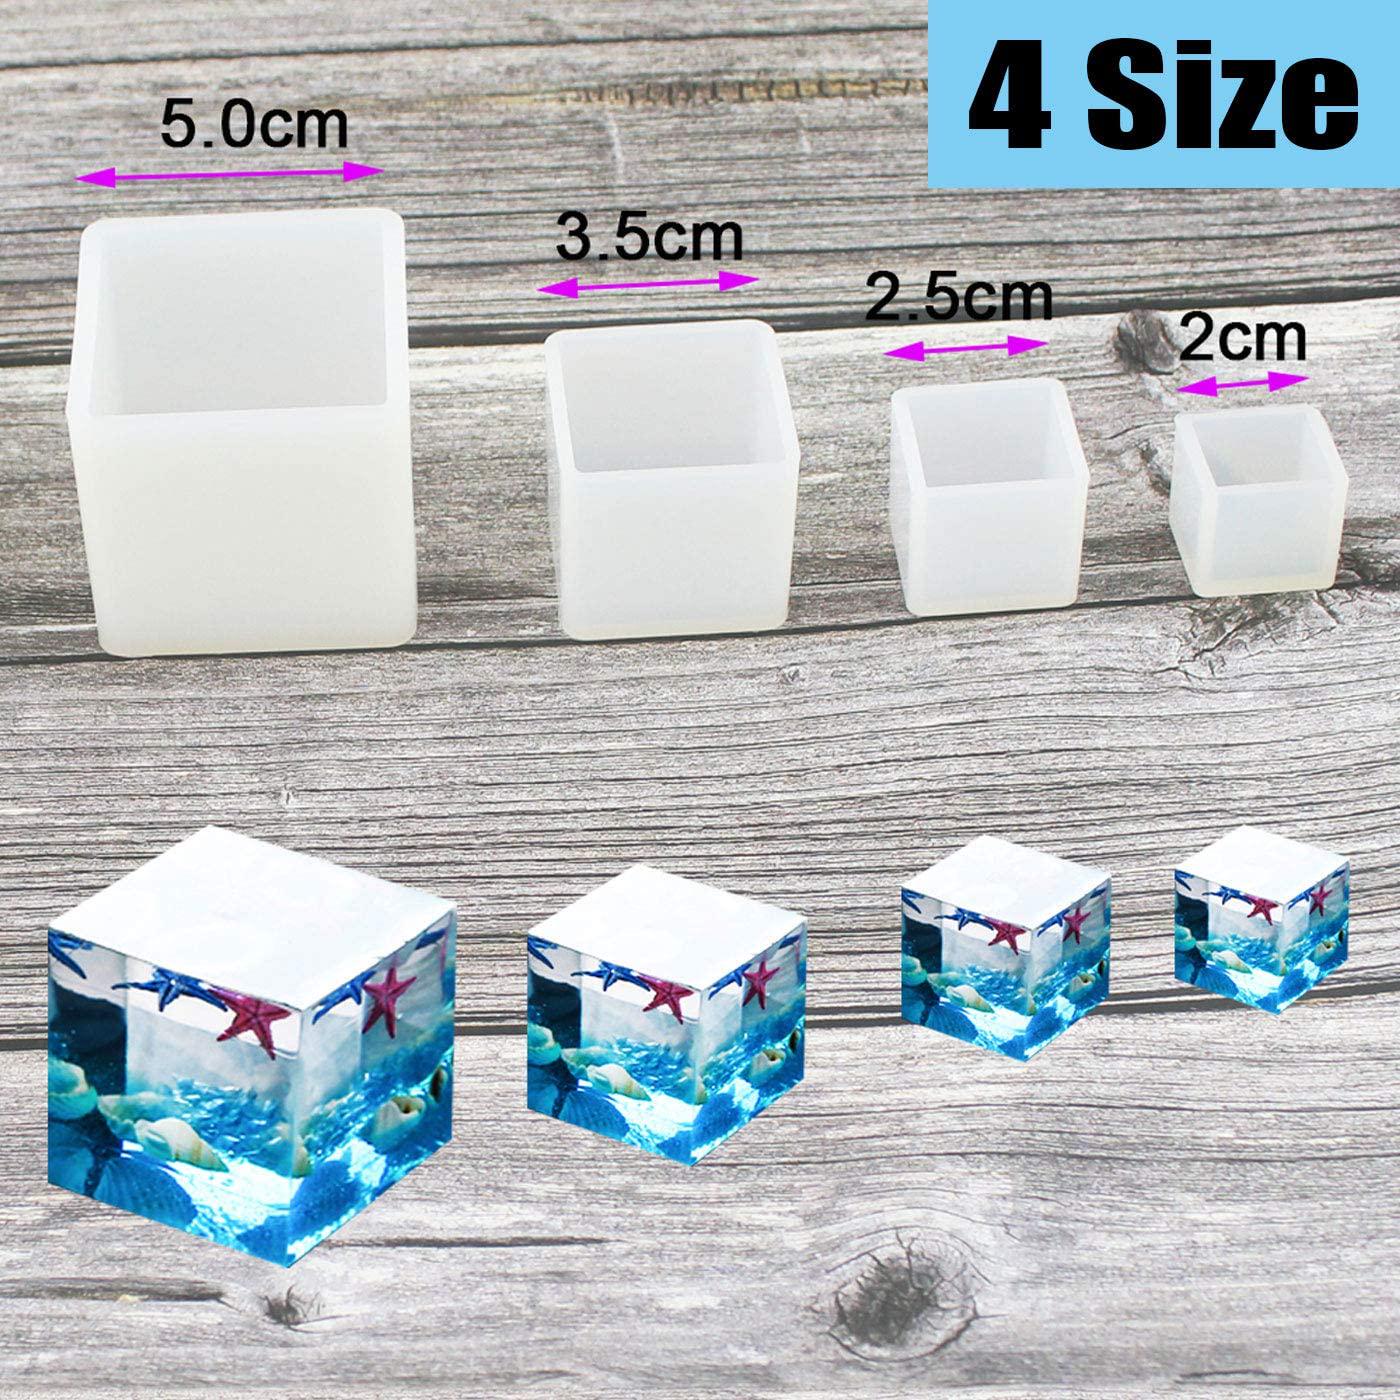 Luckkyme, Luckkyme Resin Casting Molds Square Mold Cube Silicone Molds for DIY Craft Making Silicone Clear Casting Molds, 4Size